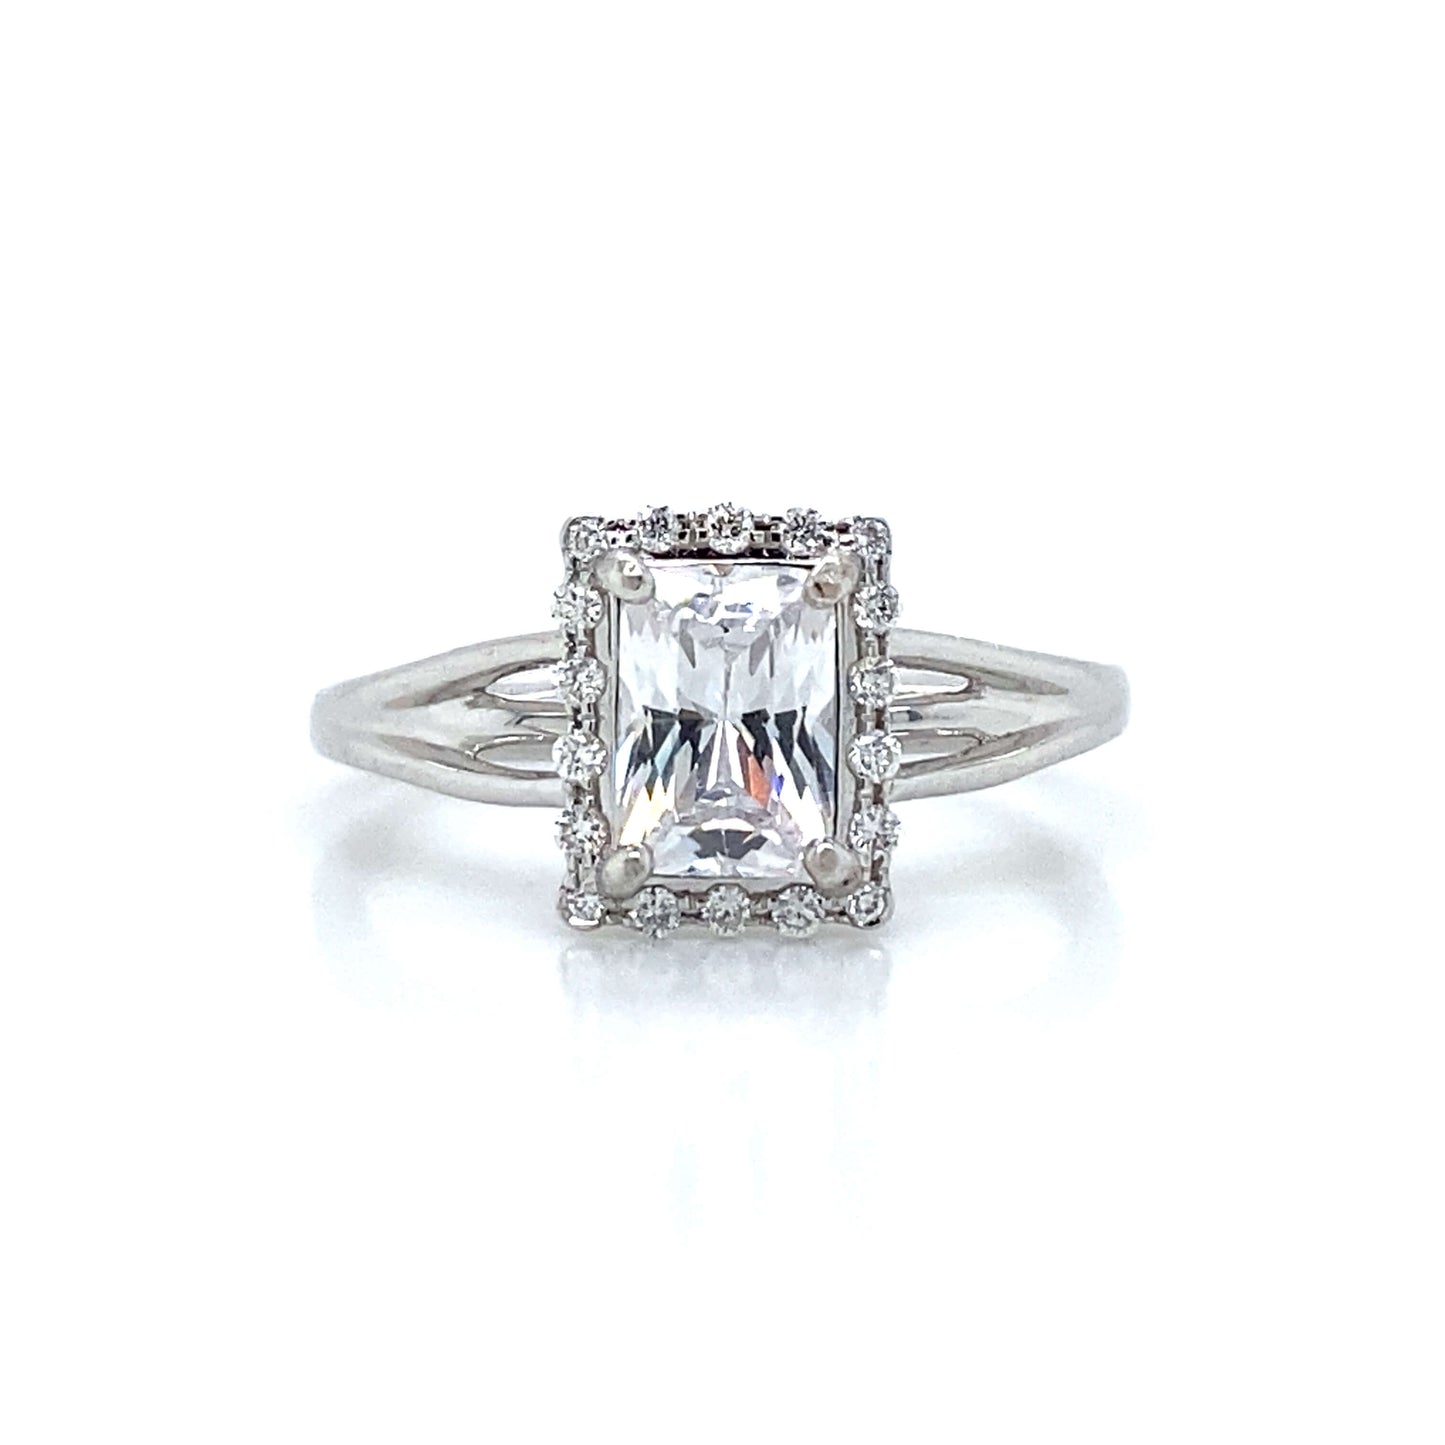 Verragio Square Halo Pave Engagement Ring in 18K White Gold